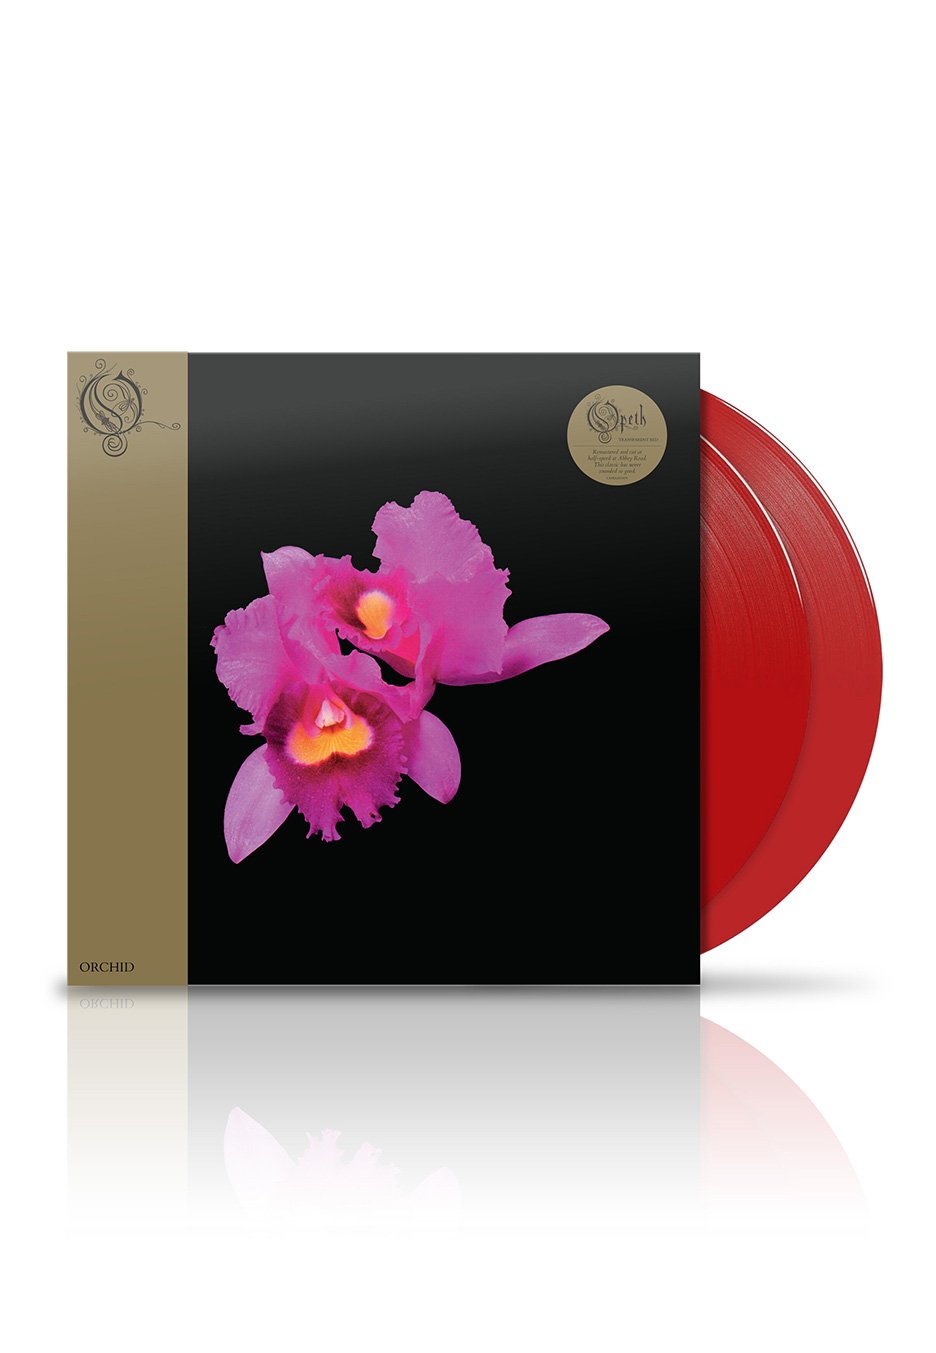 Opeth - Orchid Ltd. Red - Colored 2 Vinyl